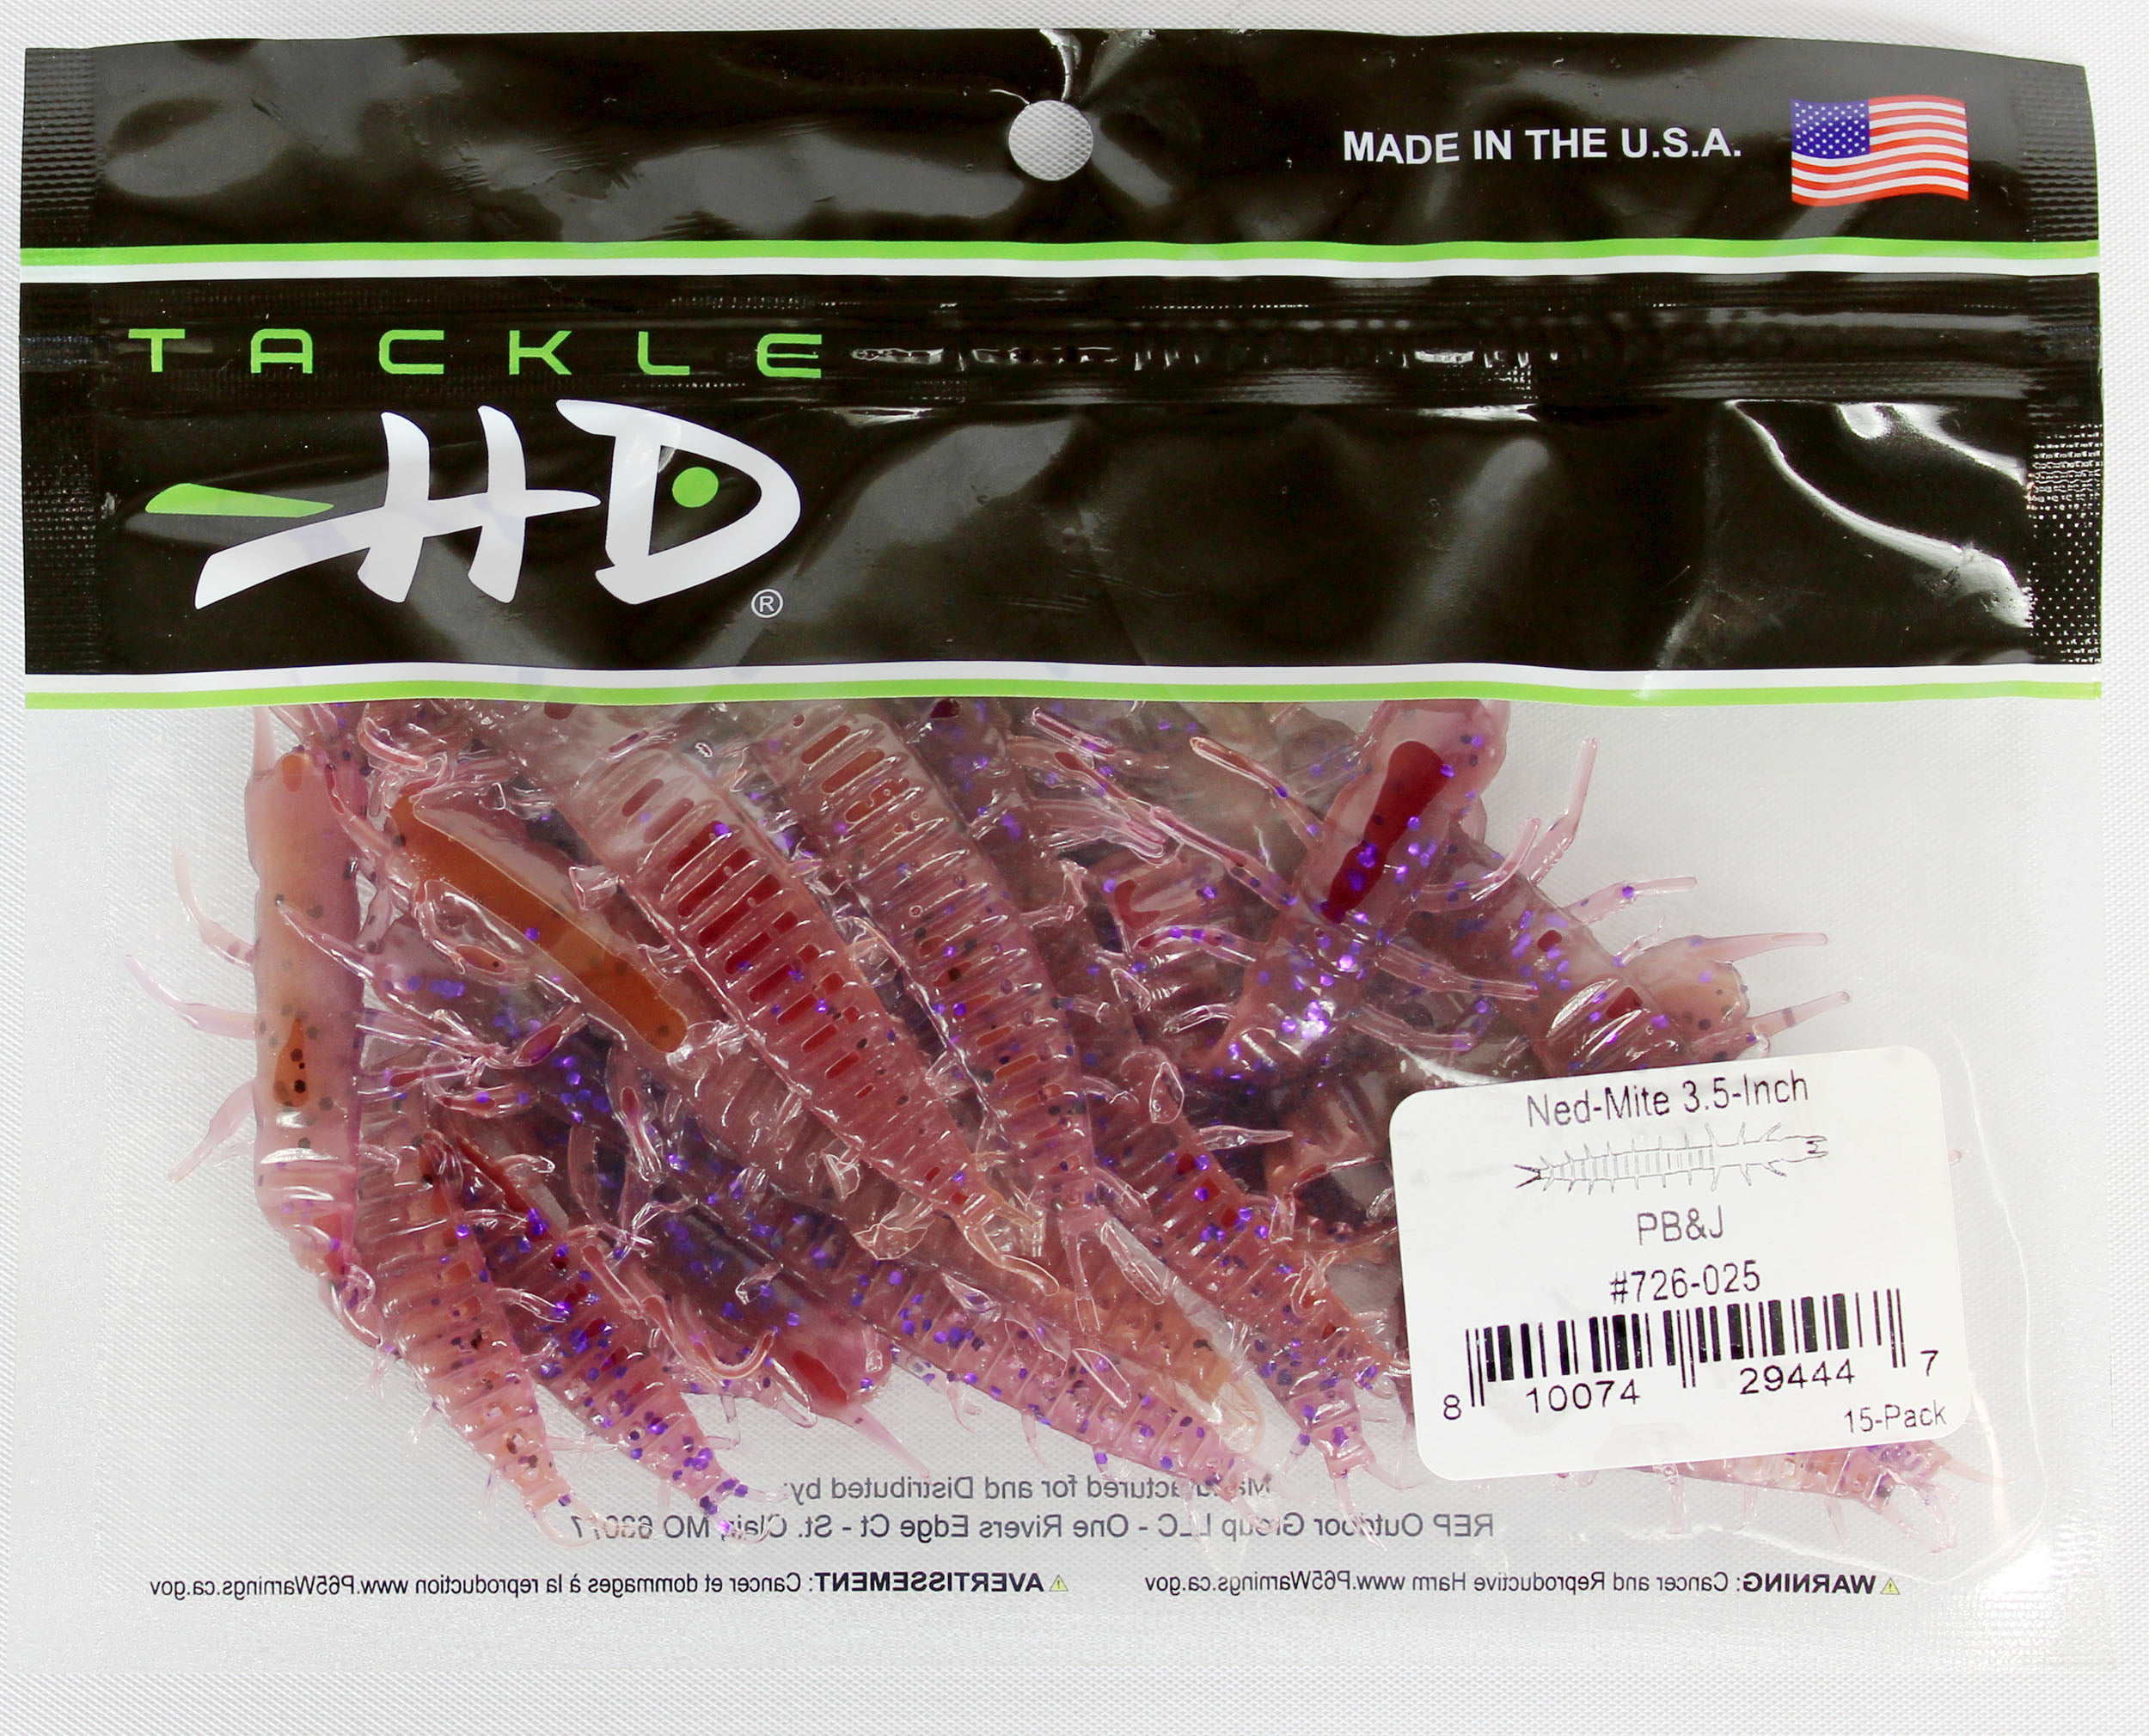 Tackle HD 15-Pack, Ned-Mite Soft Bait Fishing Lure, 3.5-inch